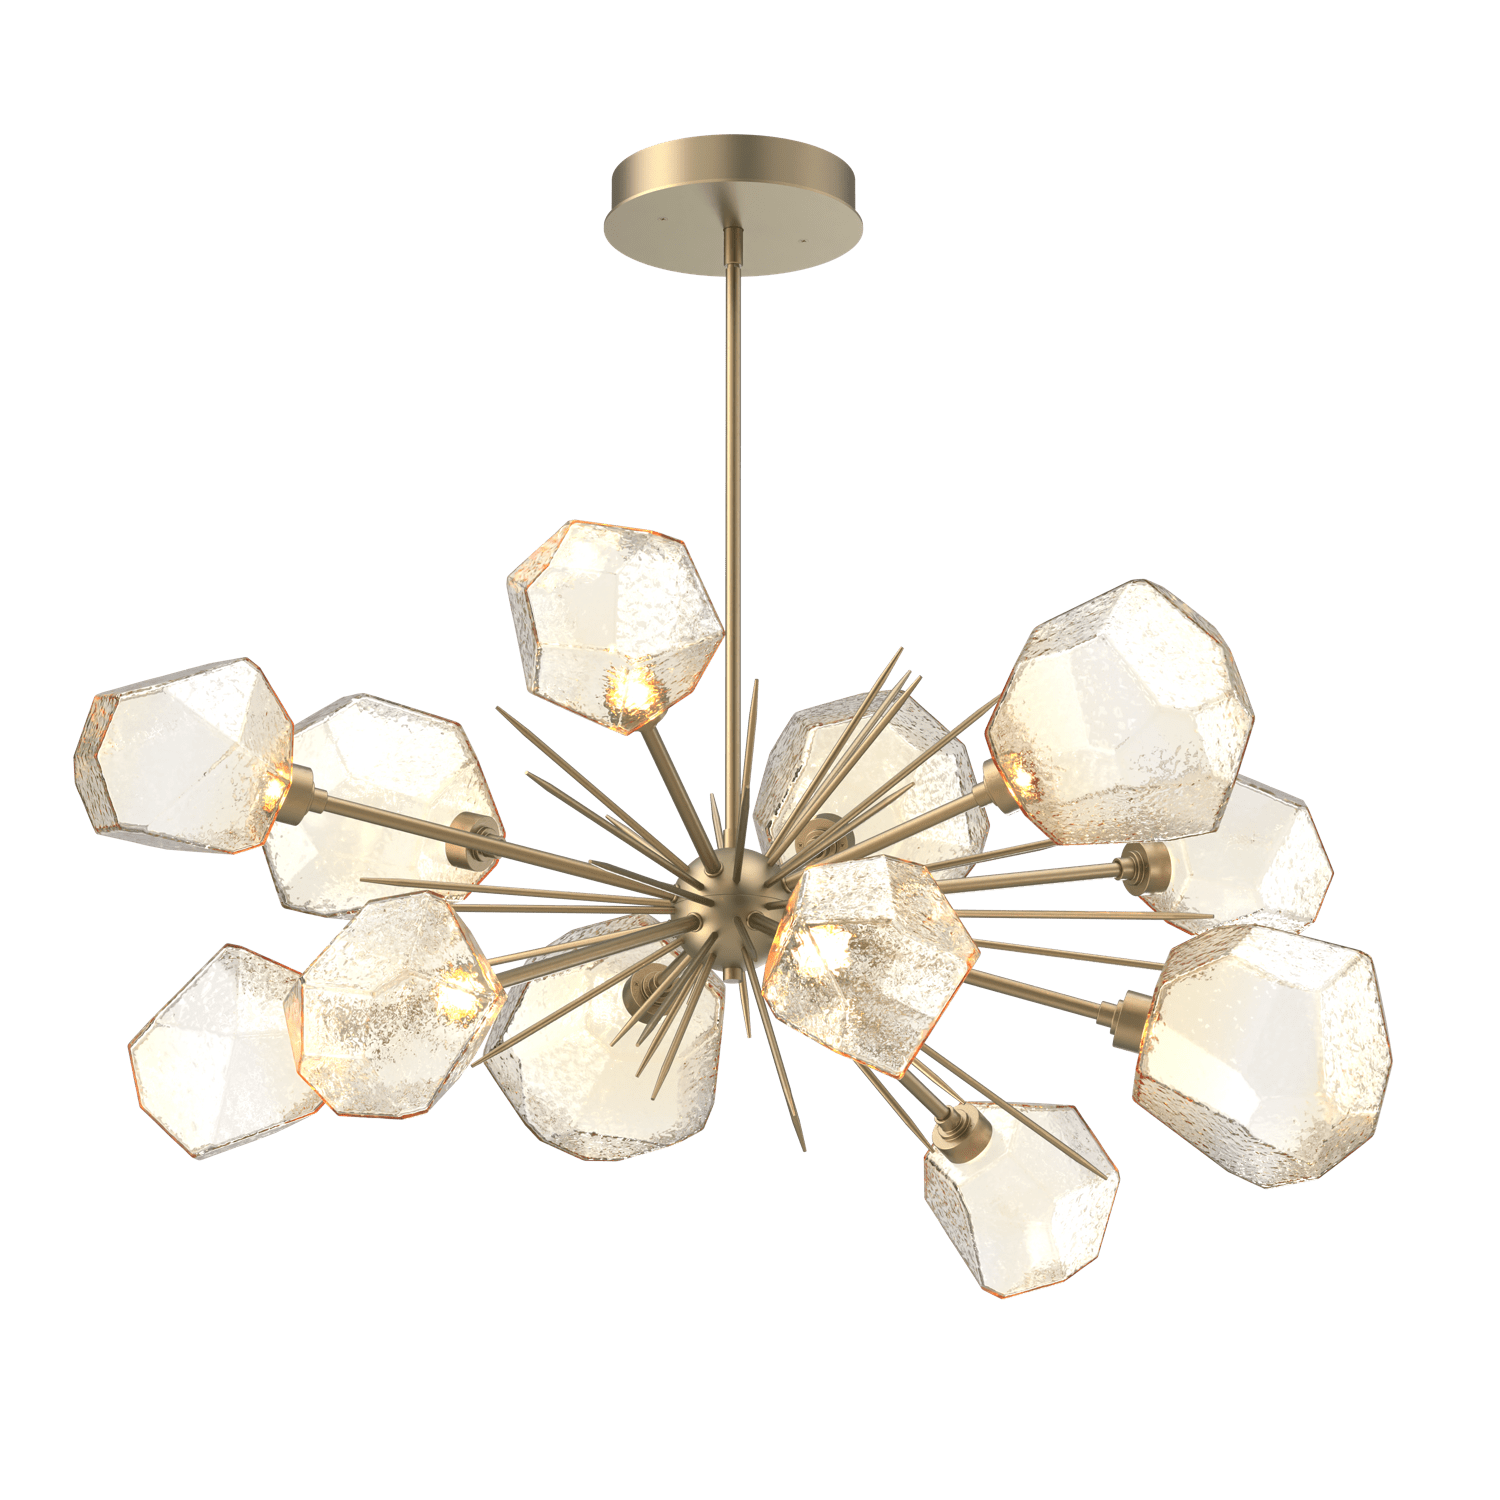 PLB0039-0D-GB-A-Hammerton-Studio-Gem-43-inch-oval-starburst-chandelier-with-gilded-brass-finish-and-amber-blown-glass-shades-and-LED-lamping